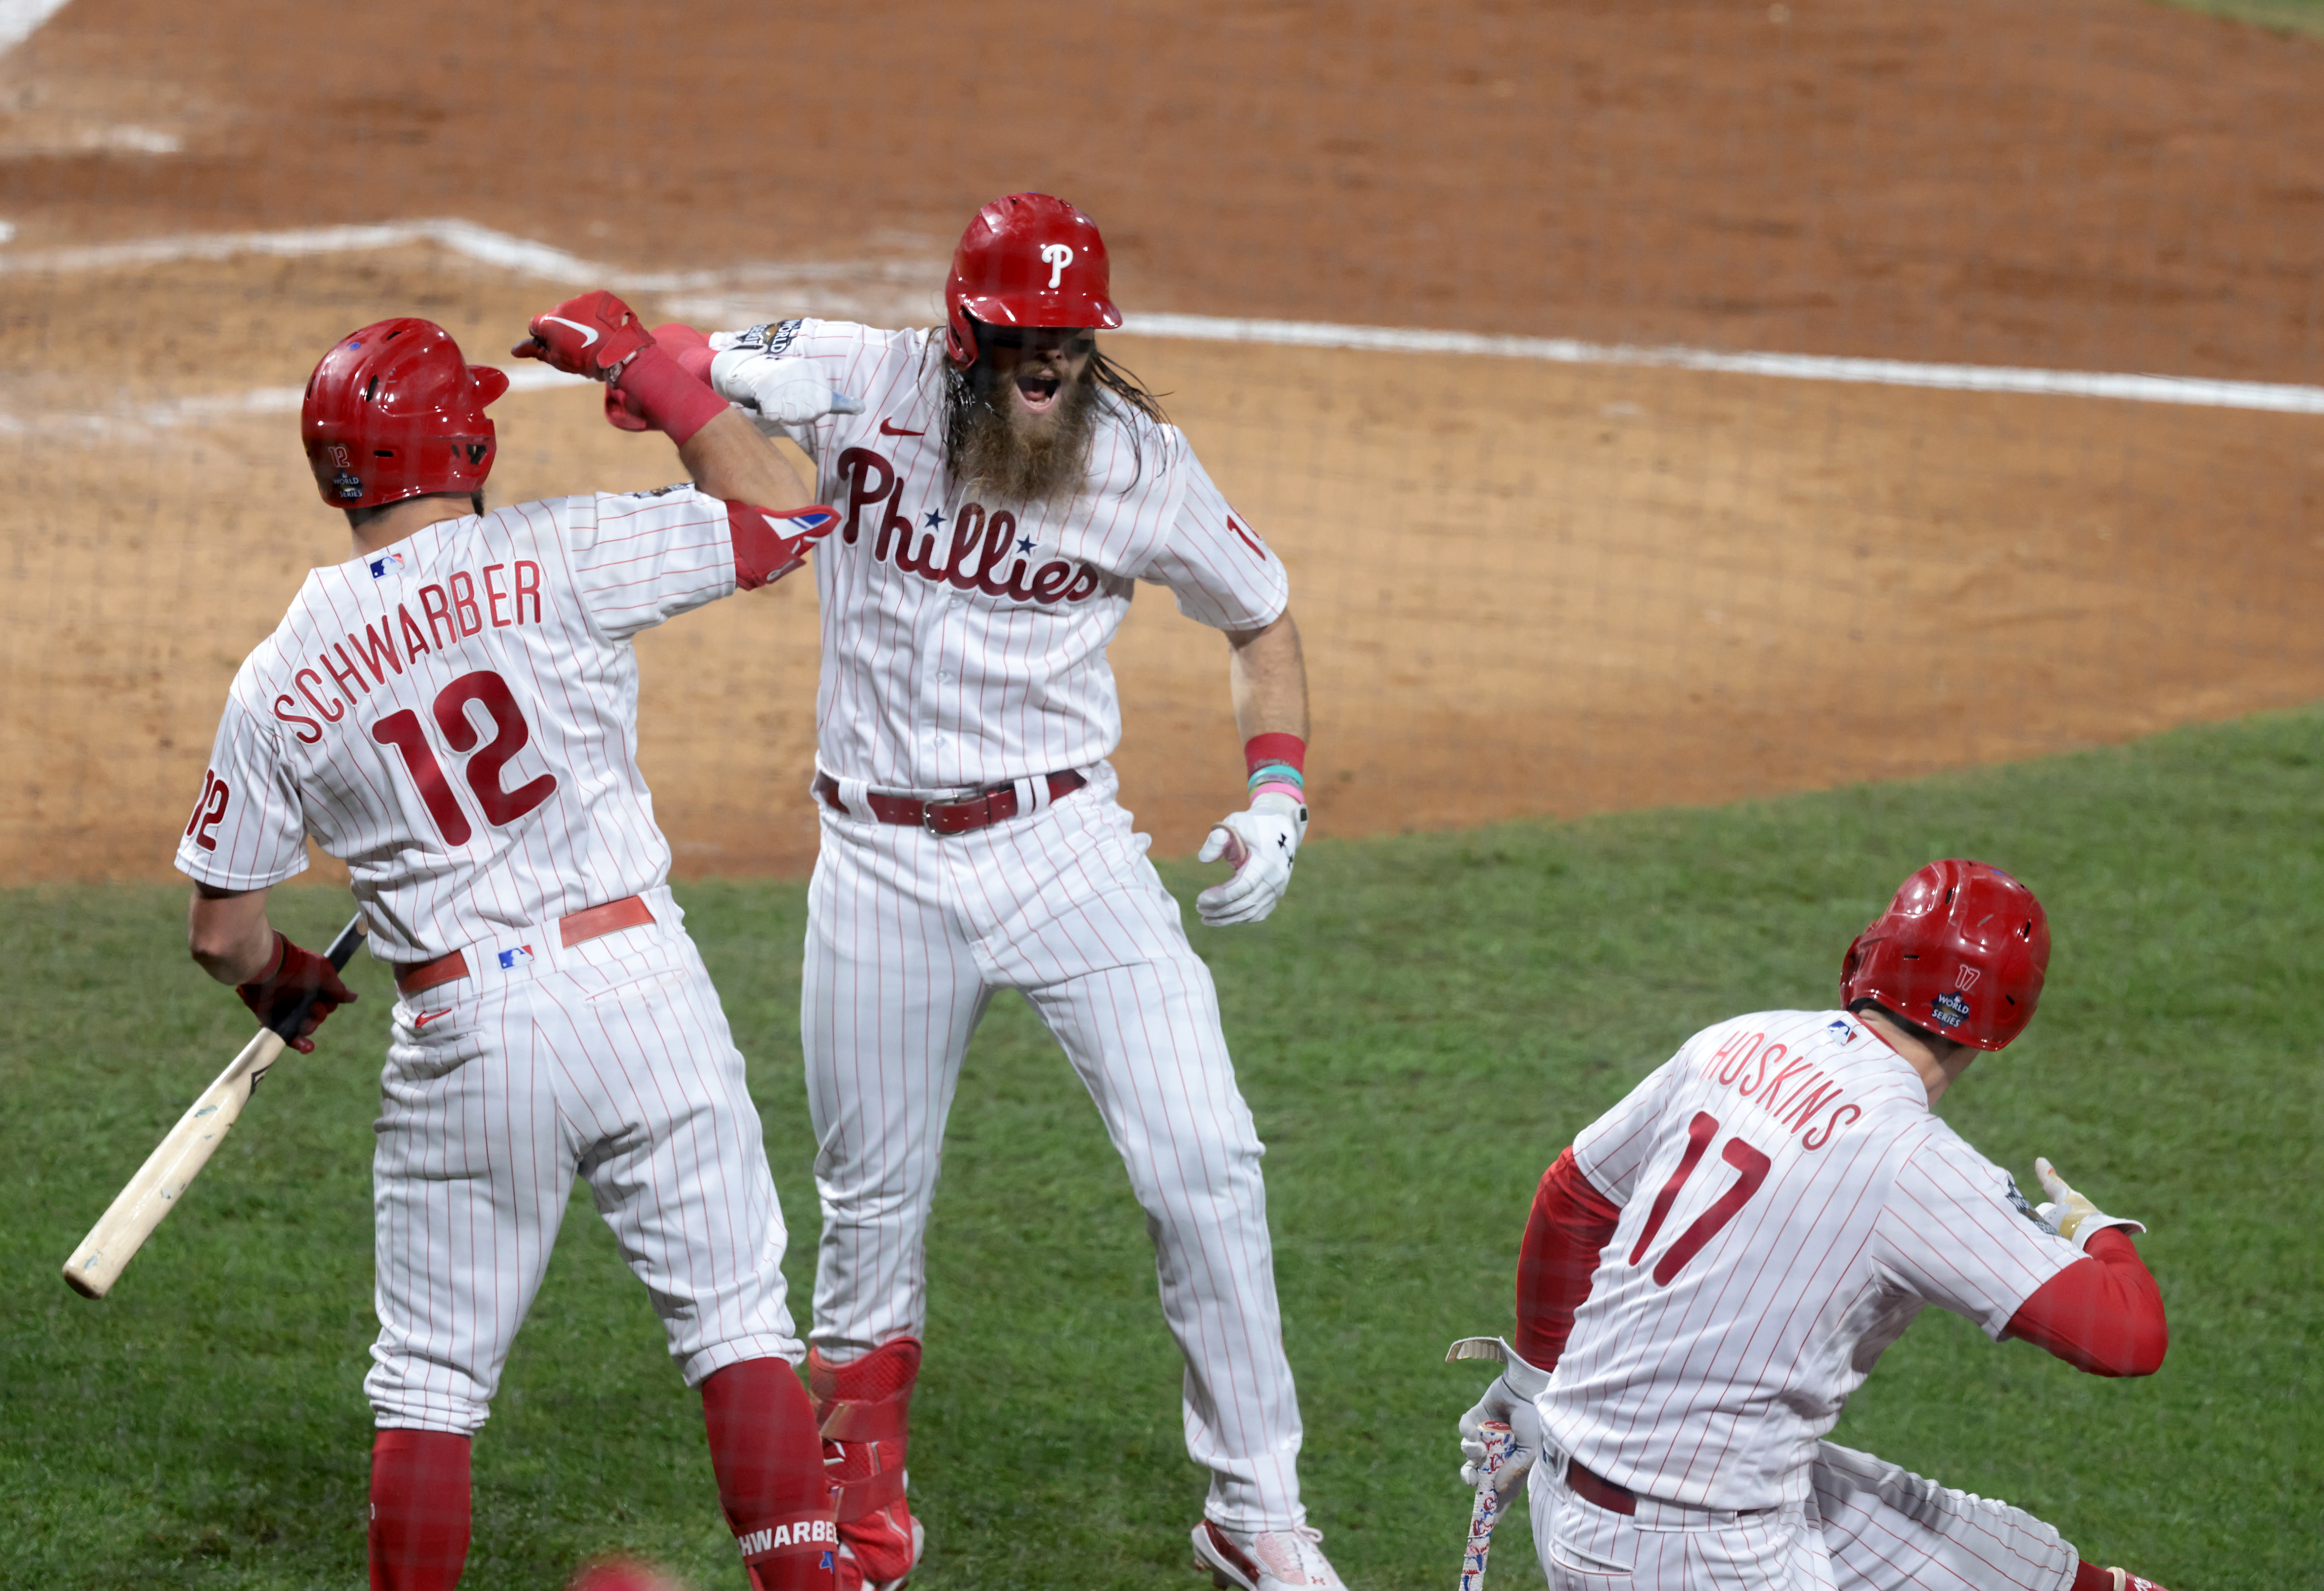 Brandon Marsh (16) of the Philadelphia Phillies is congratulated by Kyle Schwarber (12) after hitting a home run vs. the Houston Astros in the second inning during Game 3 of the World Series at Citizens Bank Park, Tuesday, Nov. 1 2022.